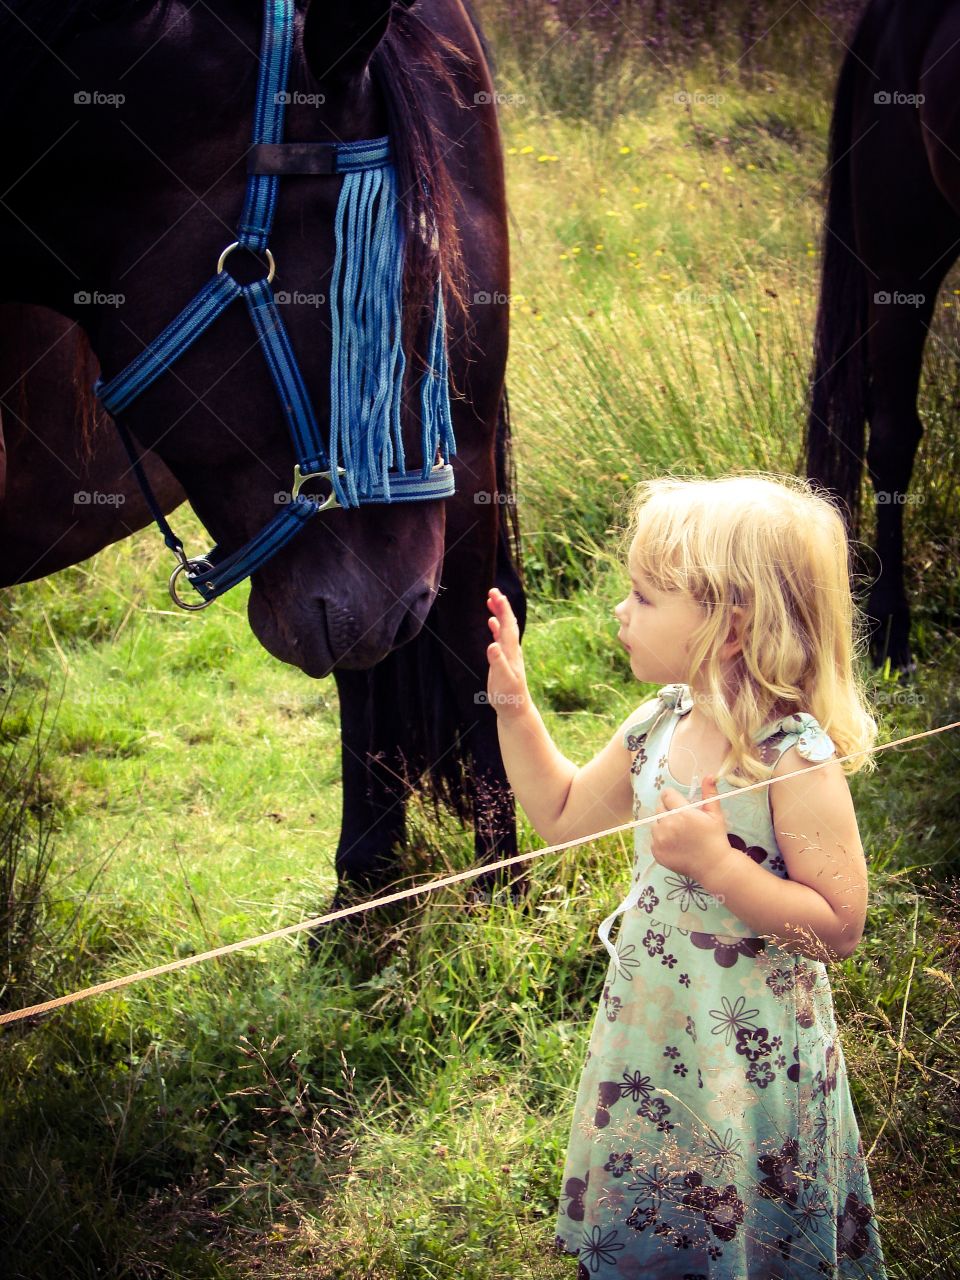 Hi friend. Little girl says hello to the big horse